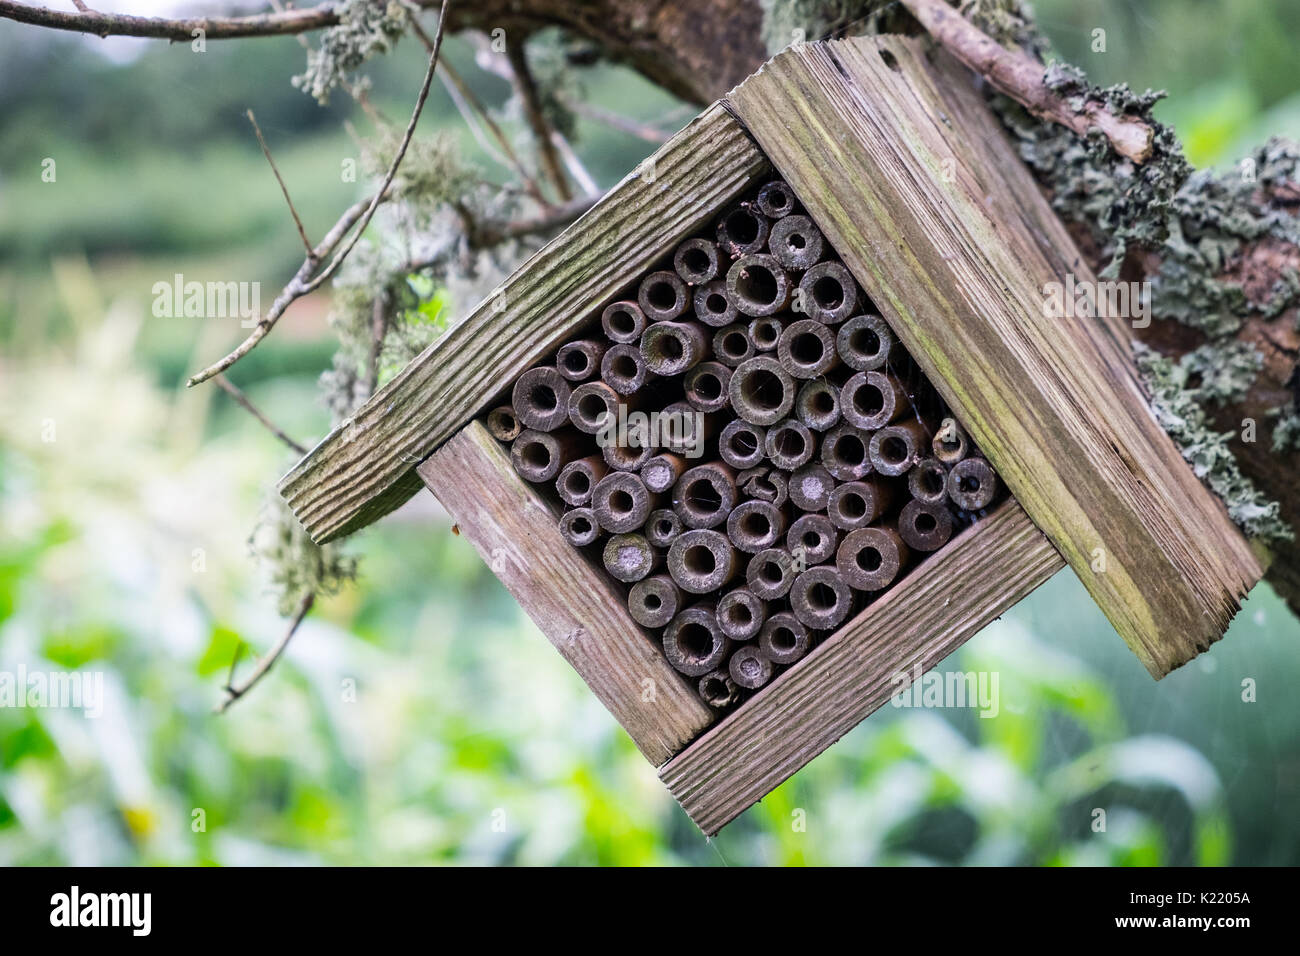 A wooden bug hotel hanging in a tree Stock Photo